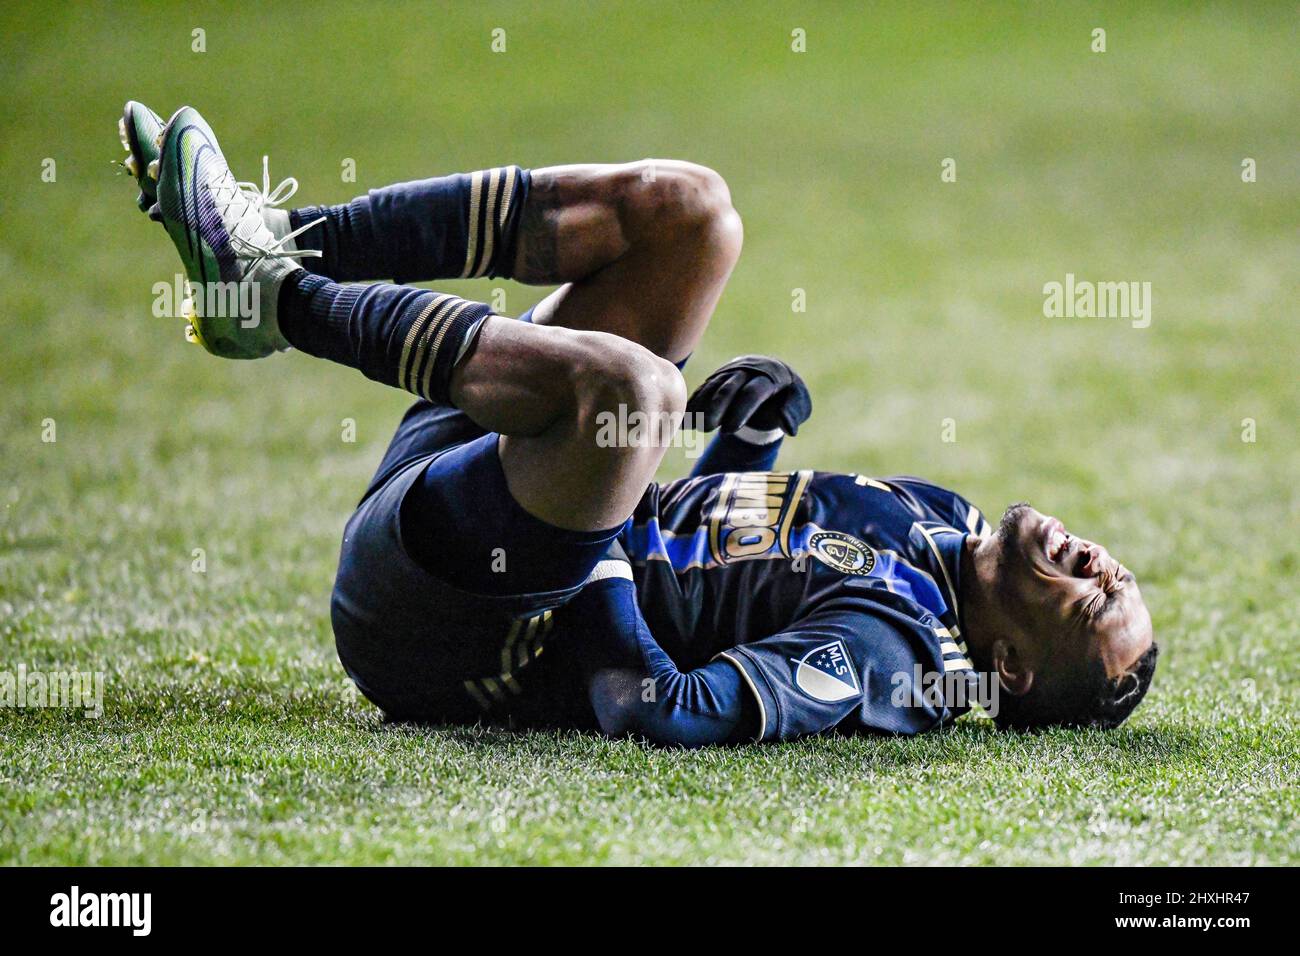 Chester, PA USA, 12 March 2022 - Midfielder Jose Martinez is fouled as the Philadelphia Union defeat the San Jose Earthquakes 2 - 0 during a Major League Soccer MLS professional soccer game Stock Photo